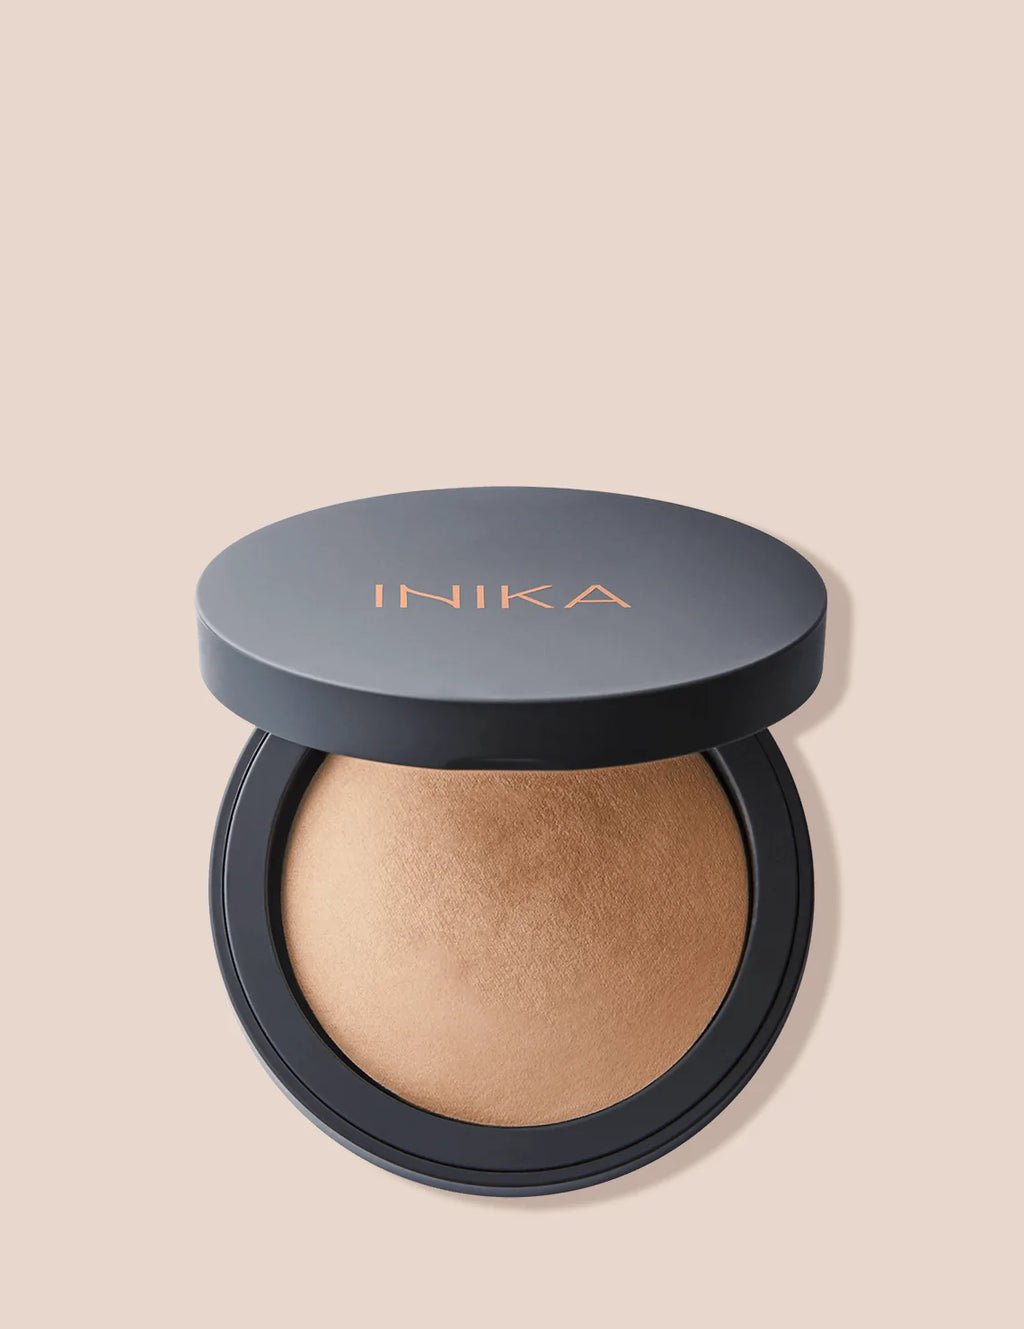 baked mineral foundation that evens out your skin tone, creating a light coverage without the powdery look. Great for everyday touchups.